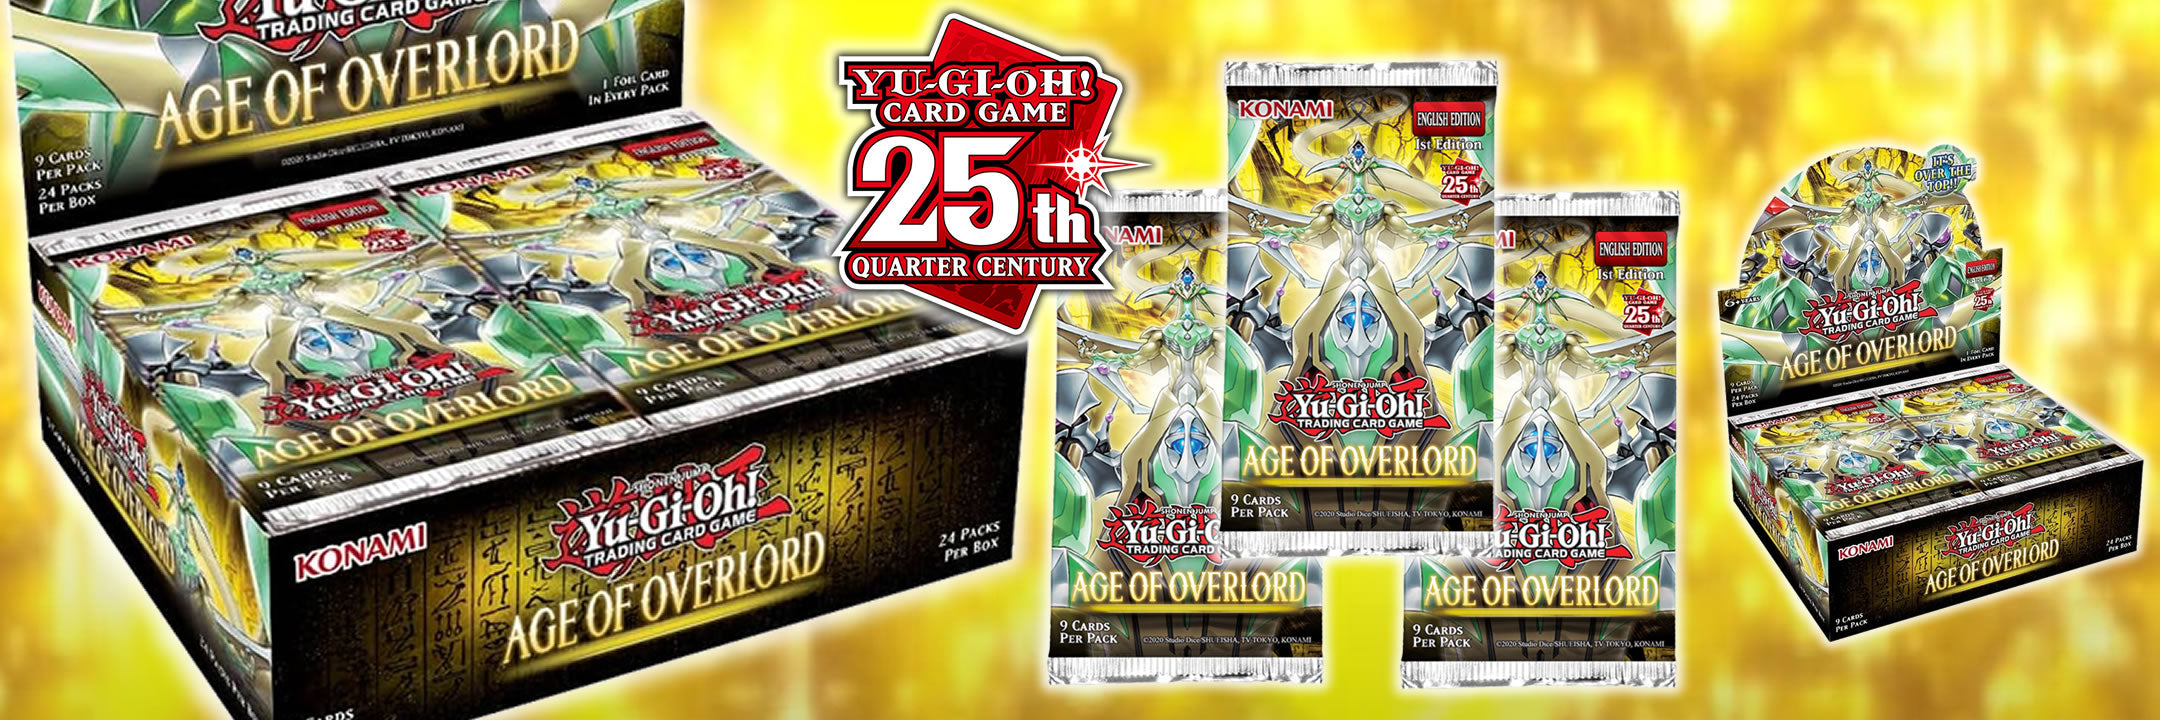 Yu-Gi-Oh! Trading Card Game - Age of Overlord